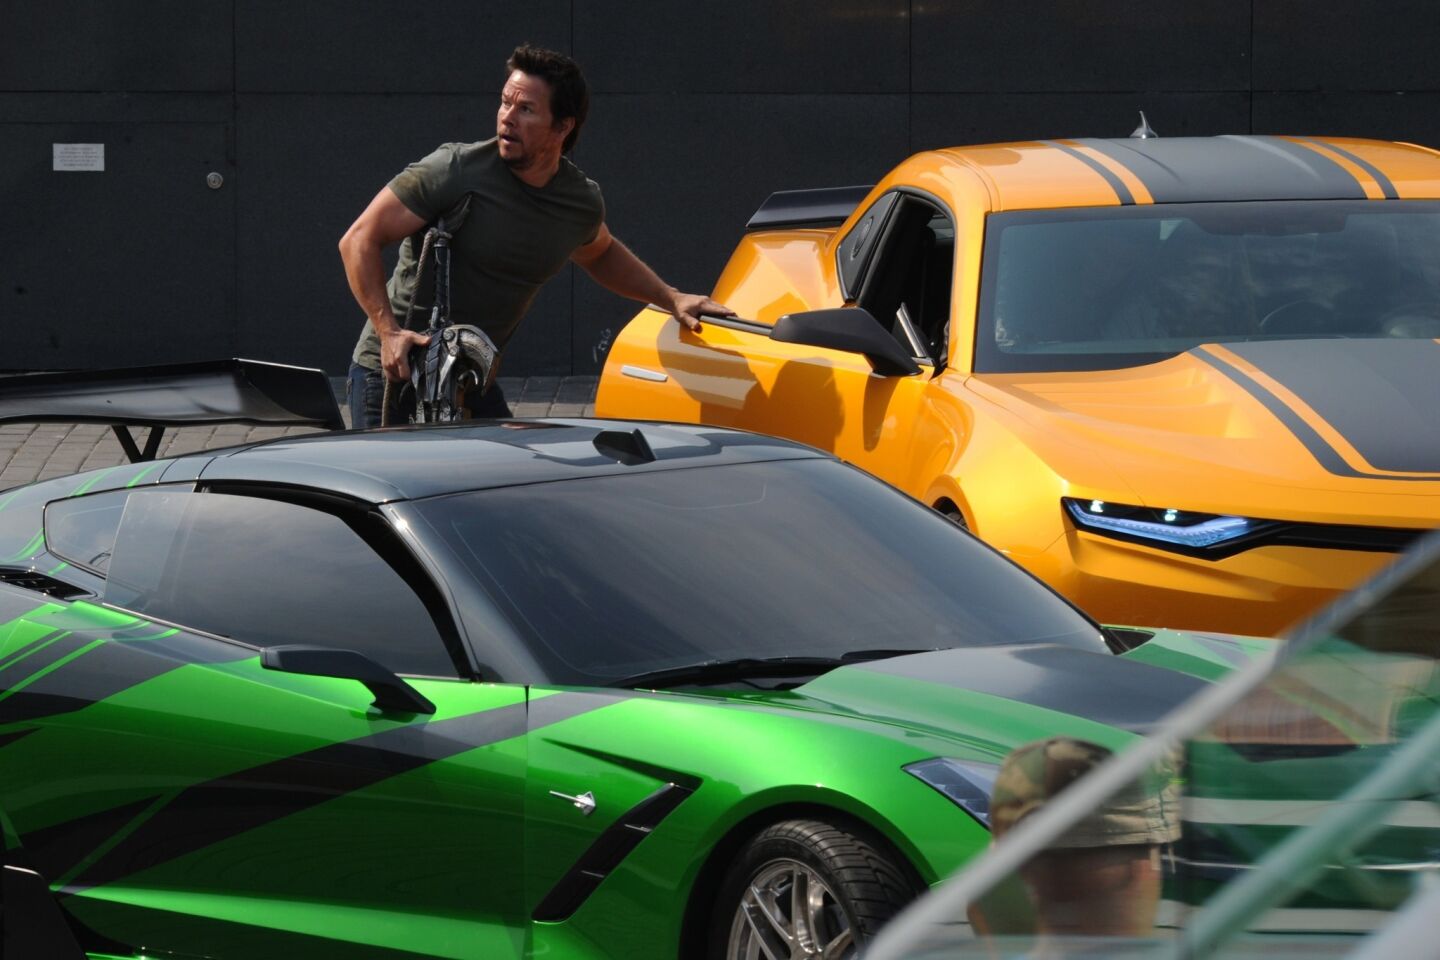 Mark Wahlberg performs on the set of "Transformers: Age of Extinction" in Hong Kong on Oct. 26, 2013.